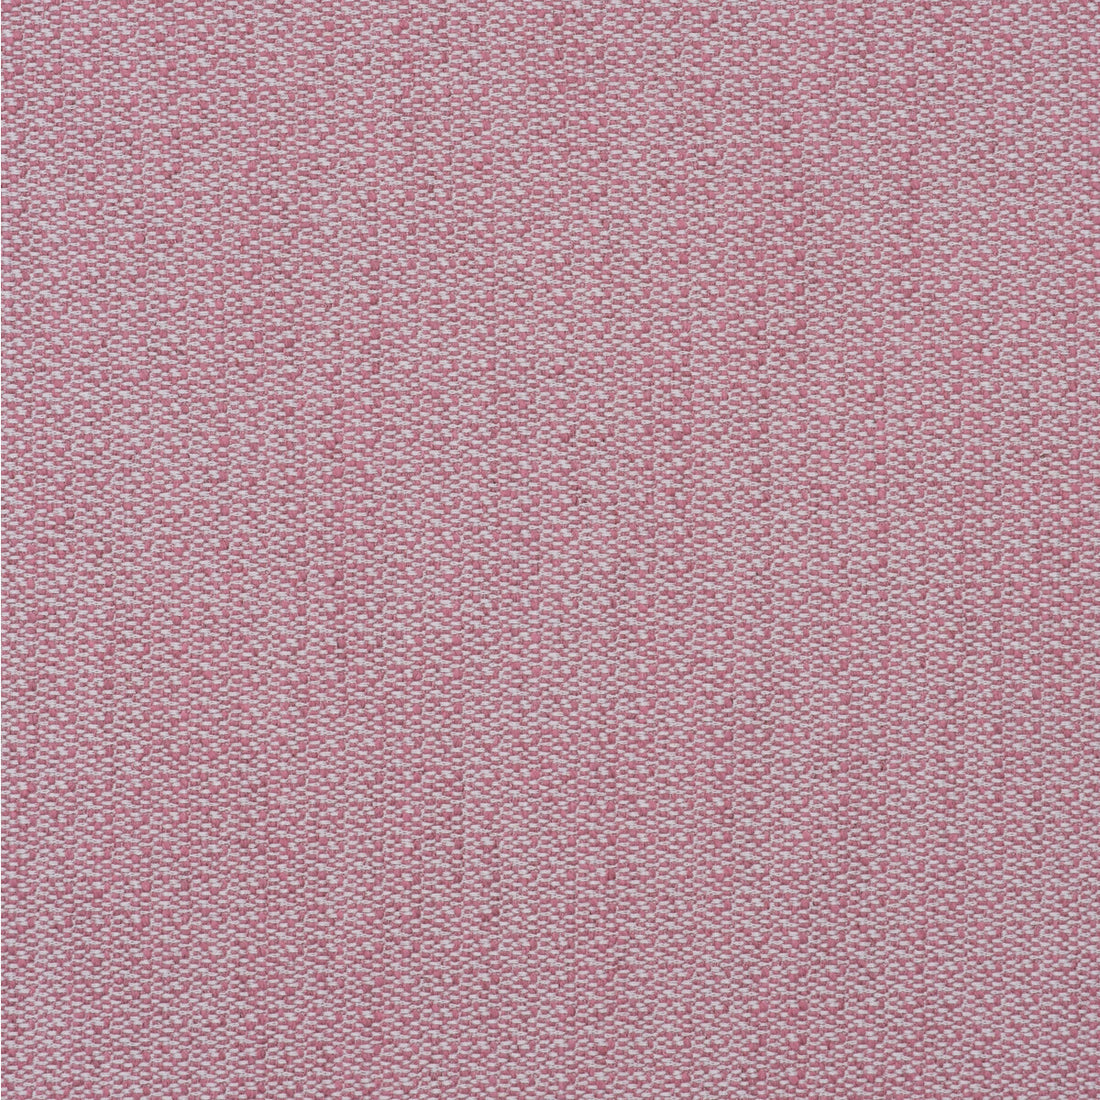 Ravello fabric in pink color - pattern AM100431.17.0 - by Kravet Couture in the Andrew Martin Amalfi collection